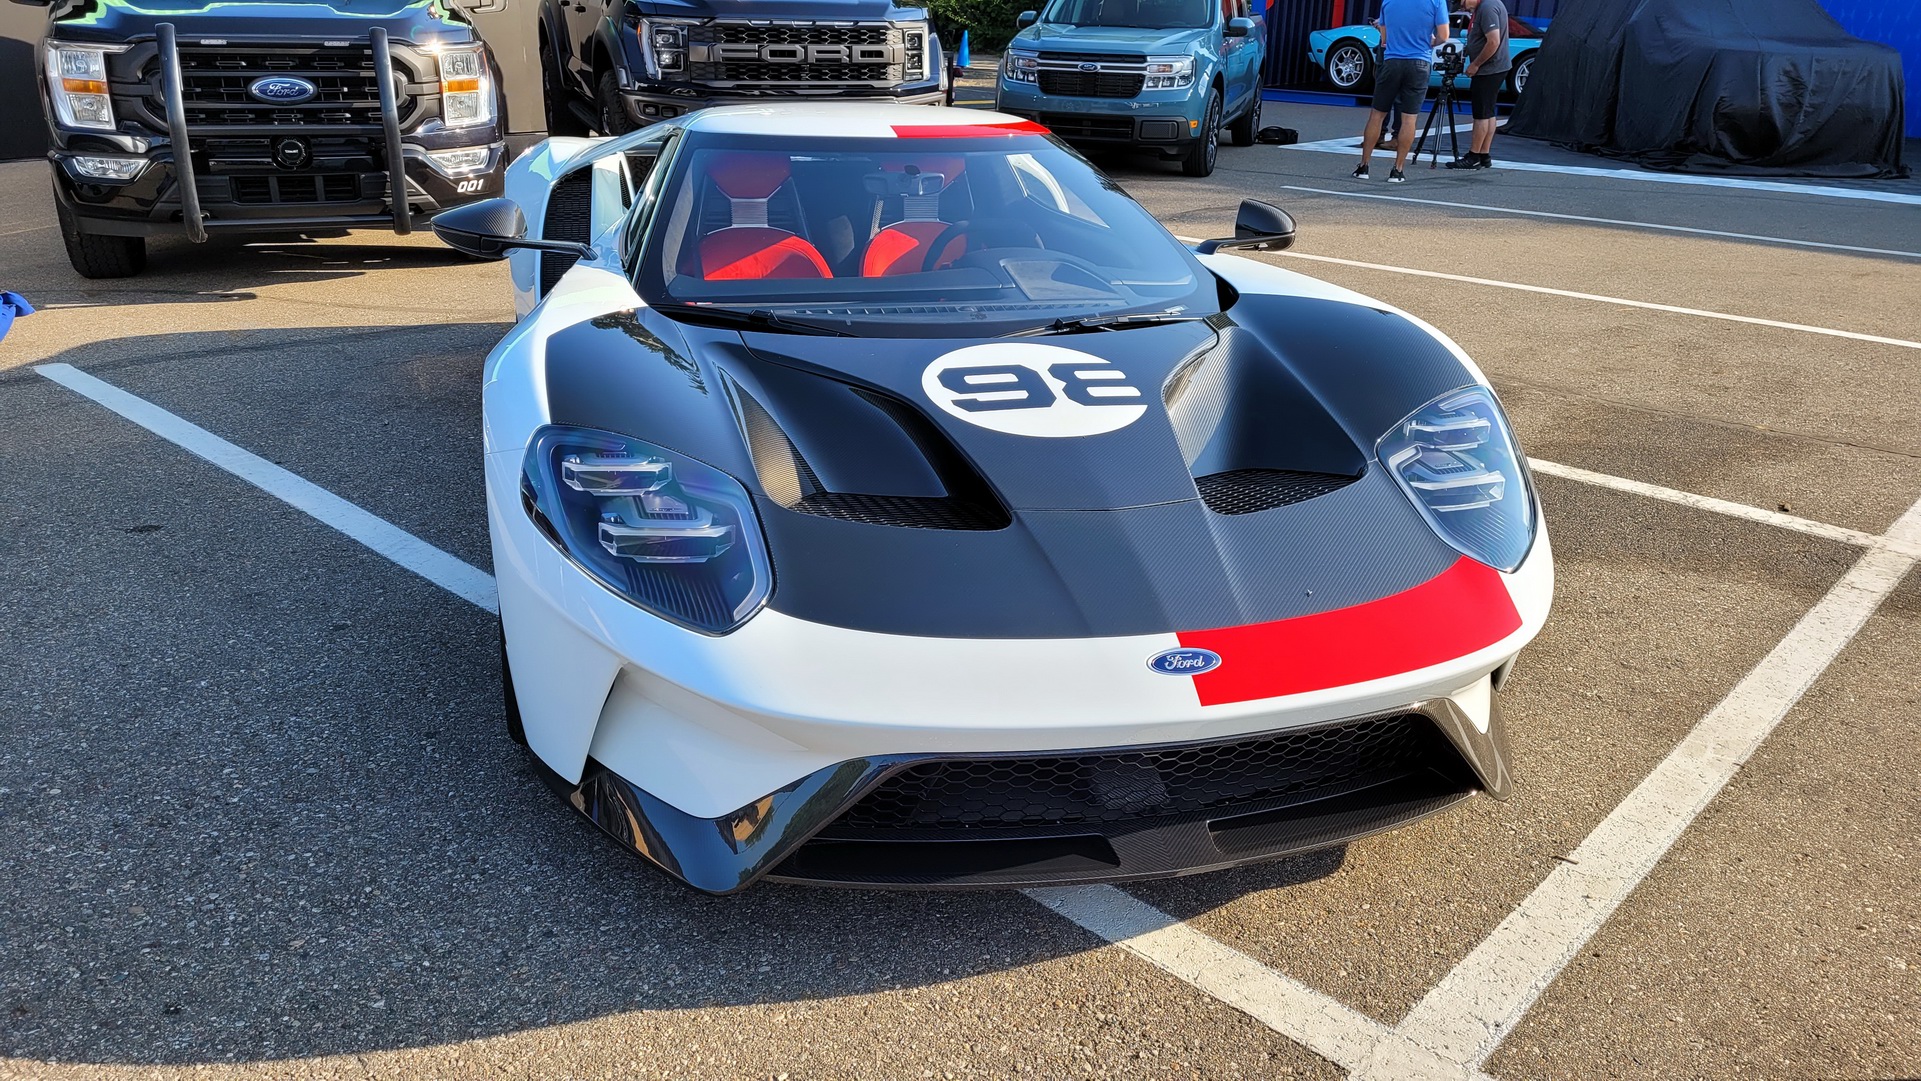 Woodward Dream Cruise Photo: The 2022 Ford GT '64 Heritage Edition